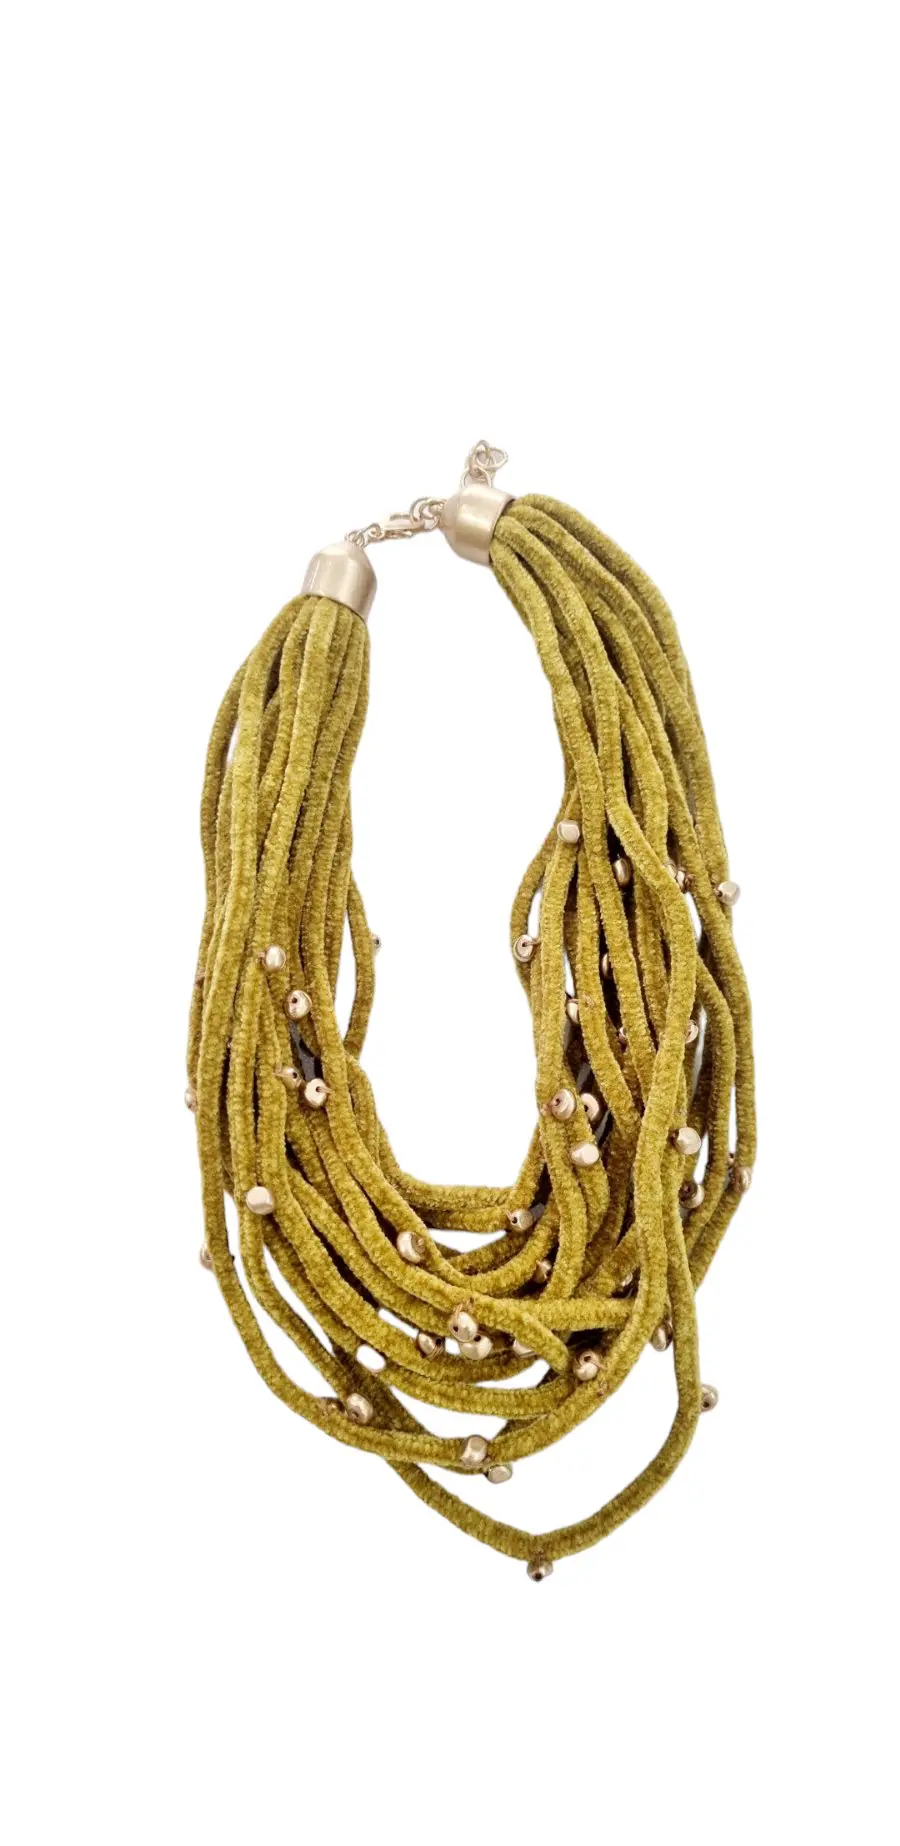 Adjustable choker necklace in mustard chenille and golden resins – Length 58cm